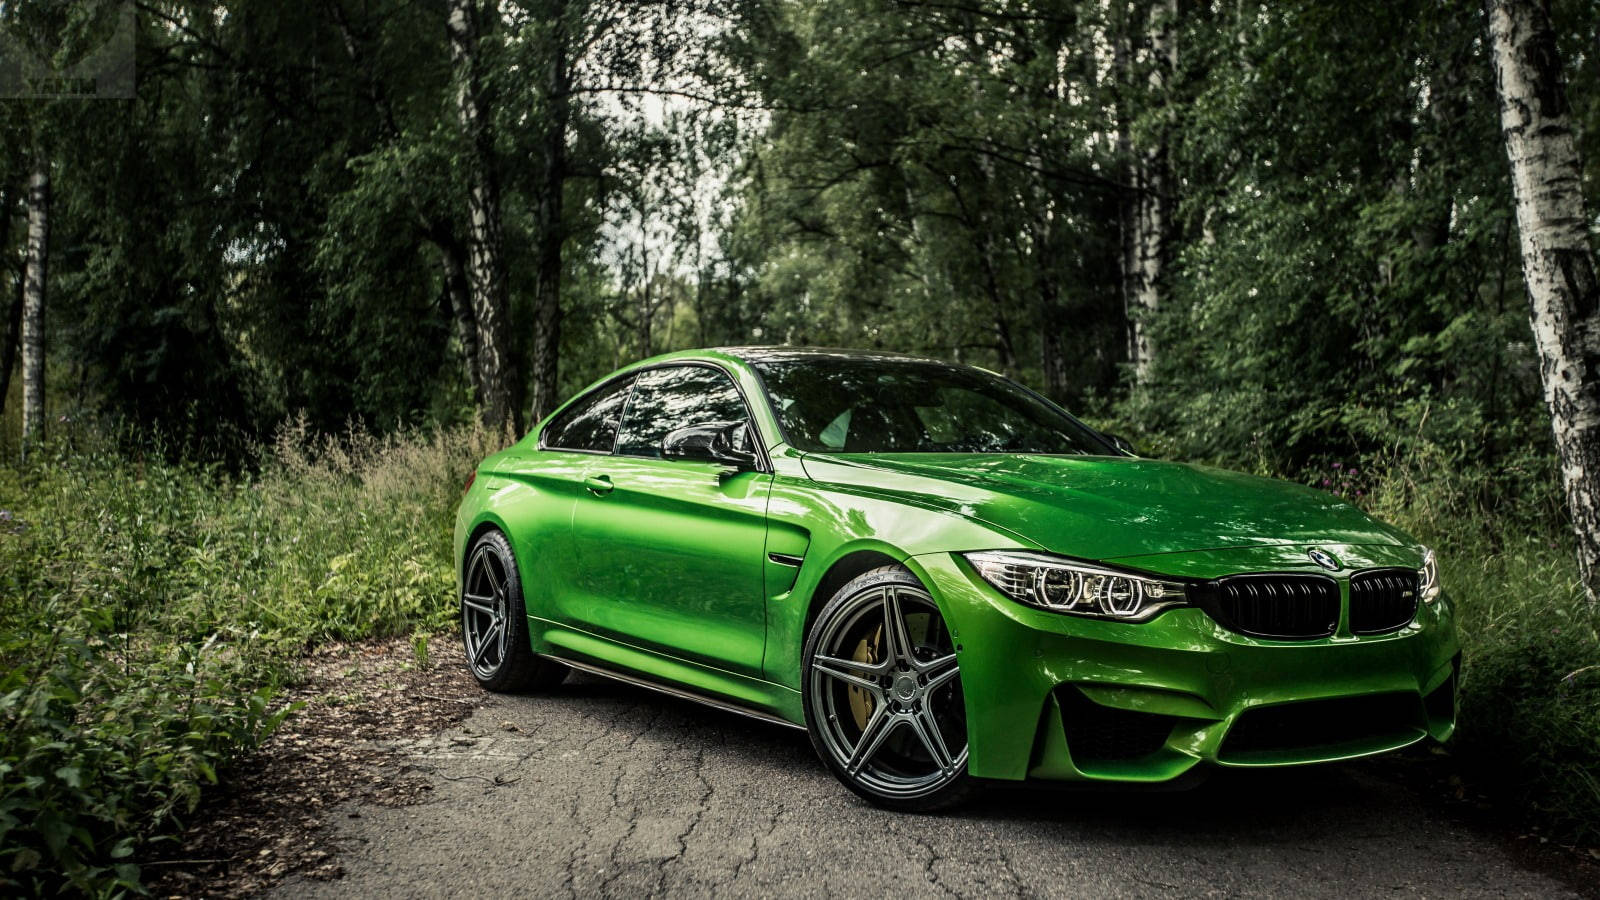 Caption: Majestic Green Bmw M4 Roaring Through The Forest Background